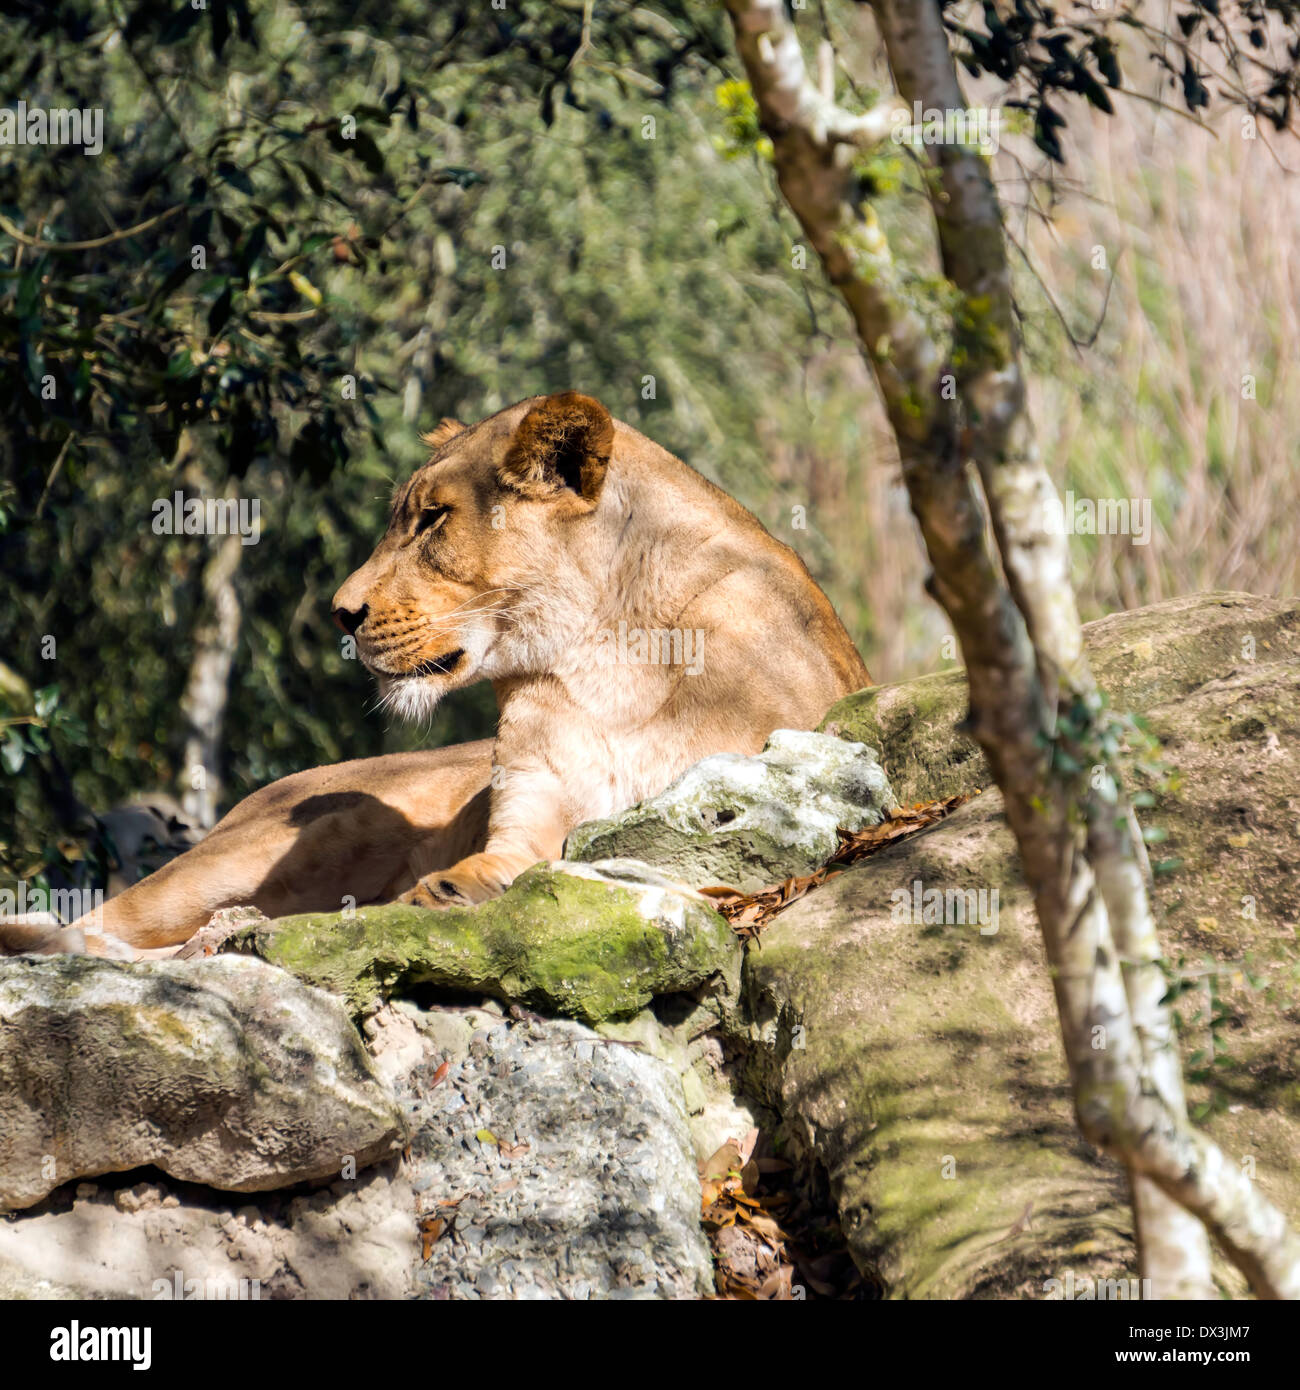 Captive lioness (Panthera leo) lounging on a rock in the Jacksonville, Florida zoo. Stock Photo